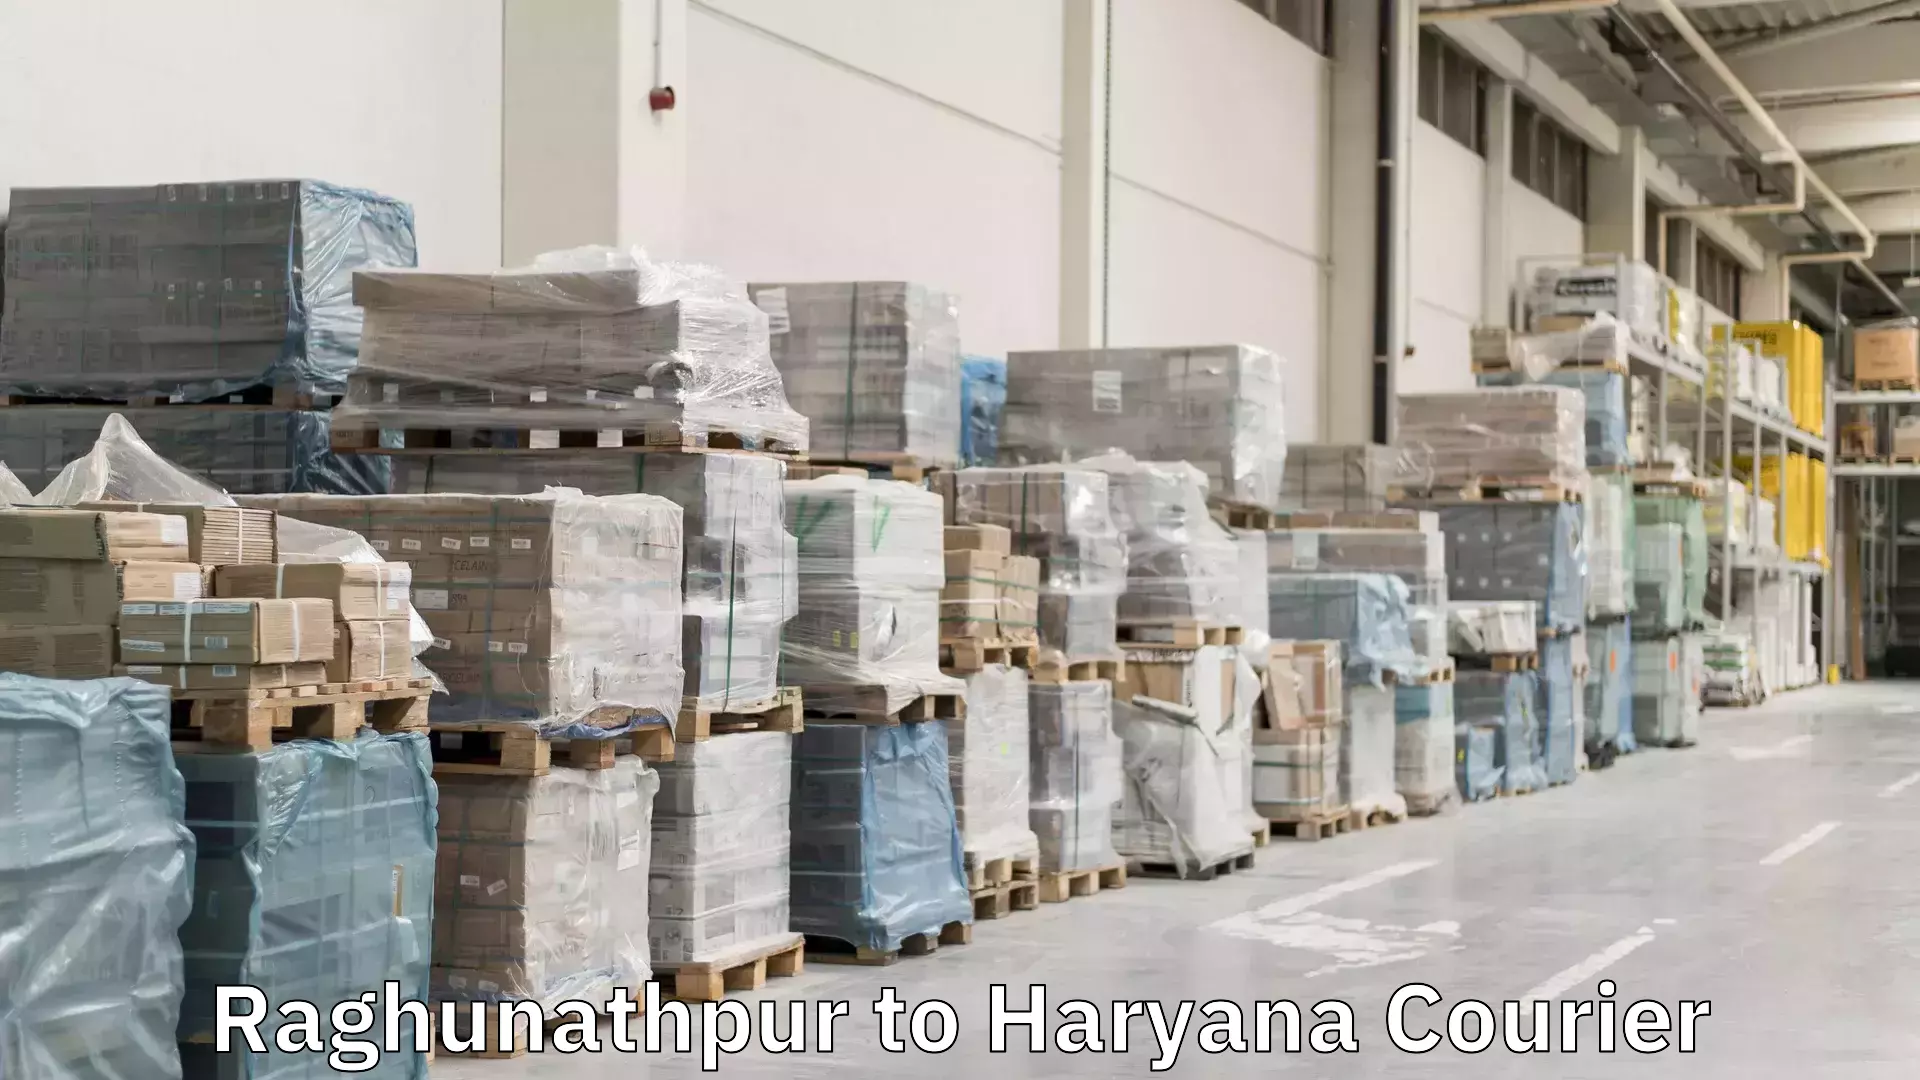 State-of-the-art courier technology Raghunathpur to Haryana